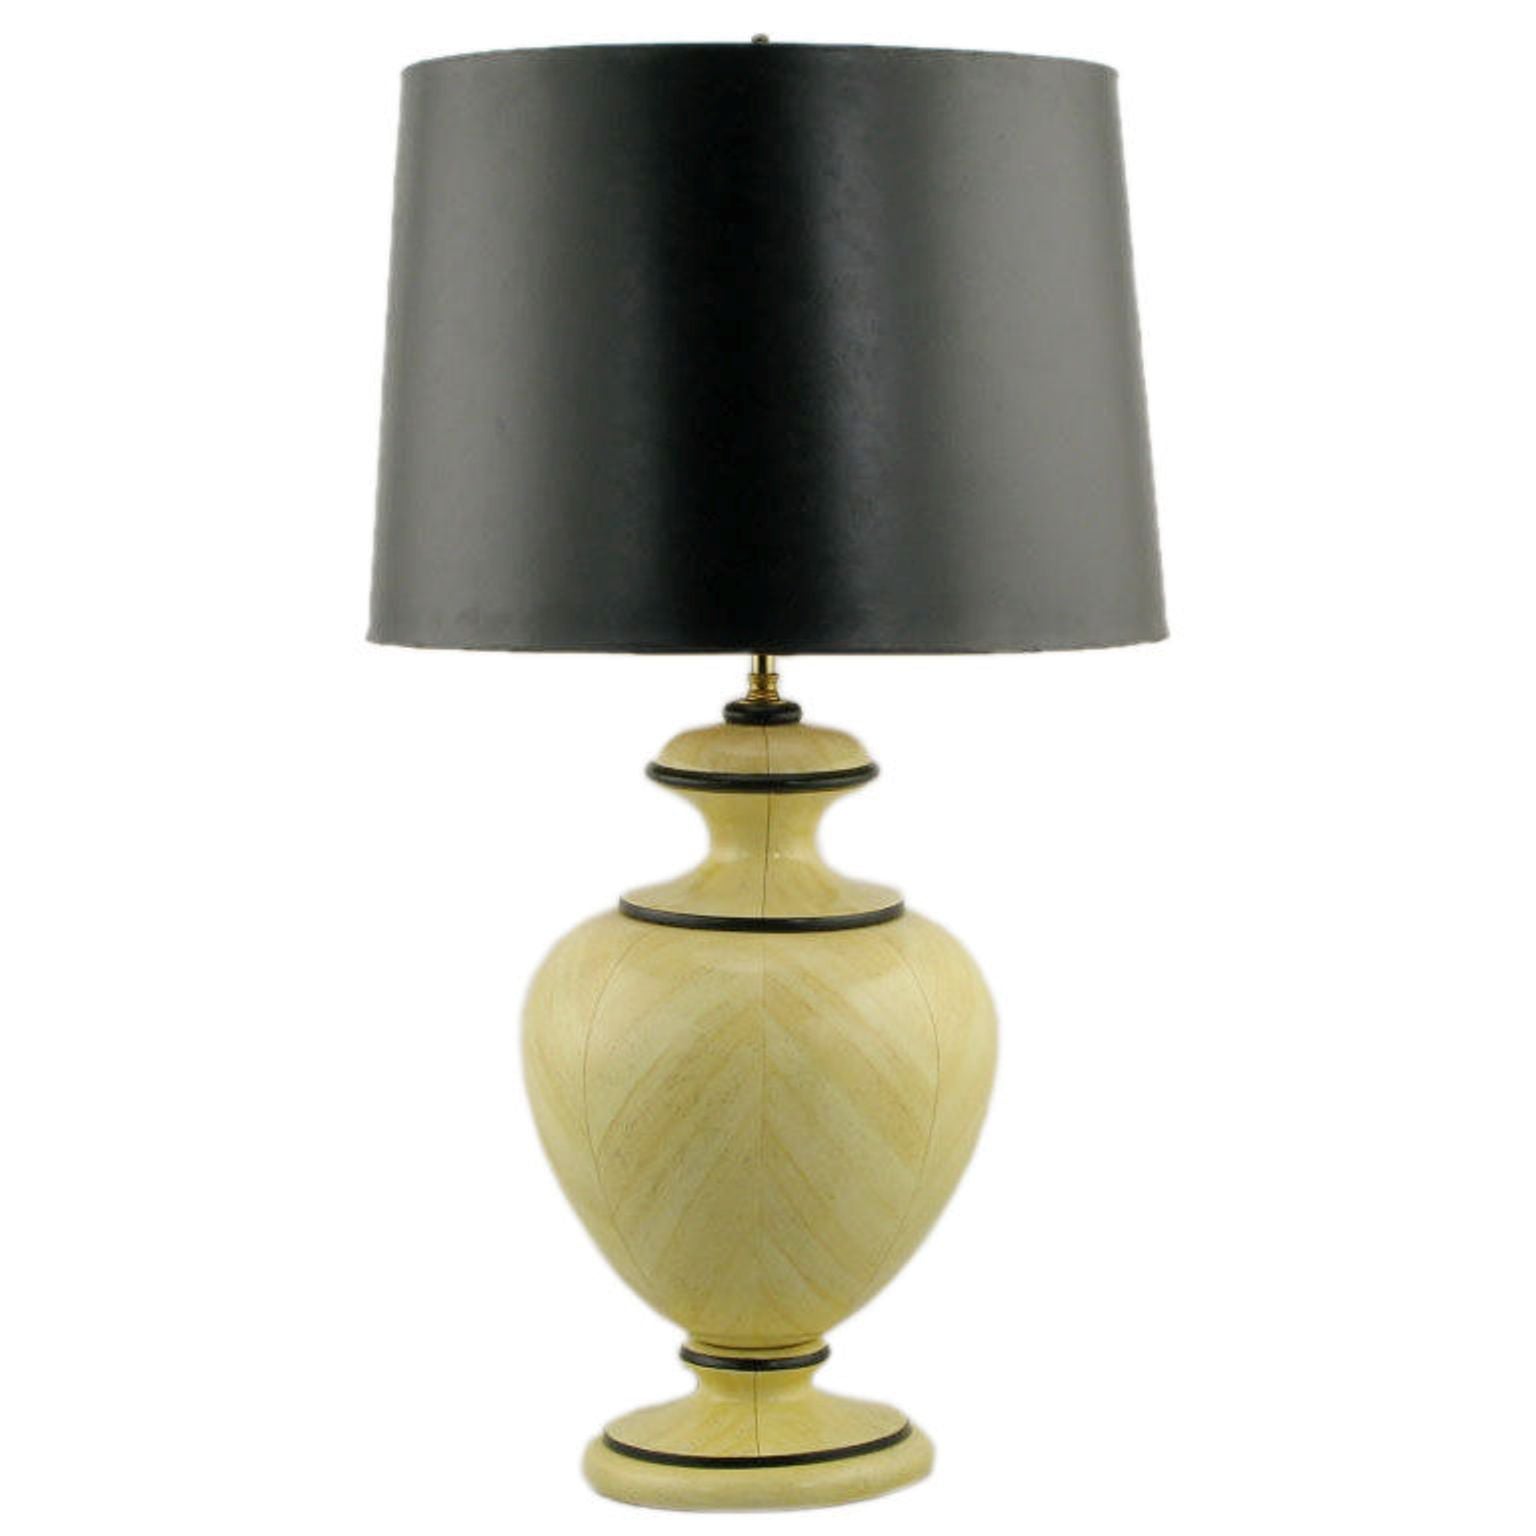 Trompe L'Oeil Travertine Urn Form Carved Wood Table Lamp For Sale